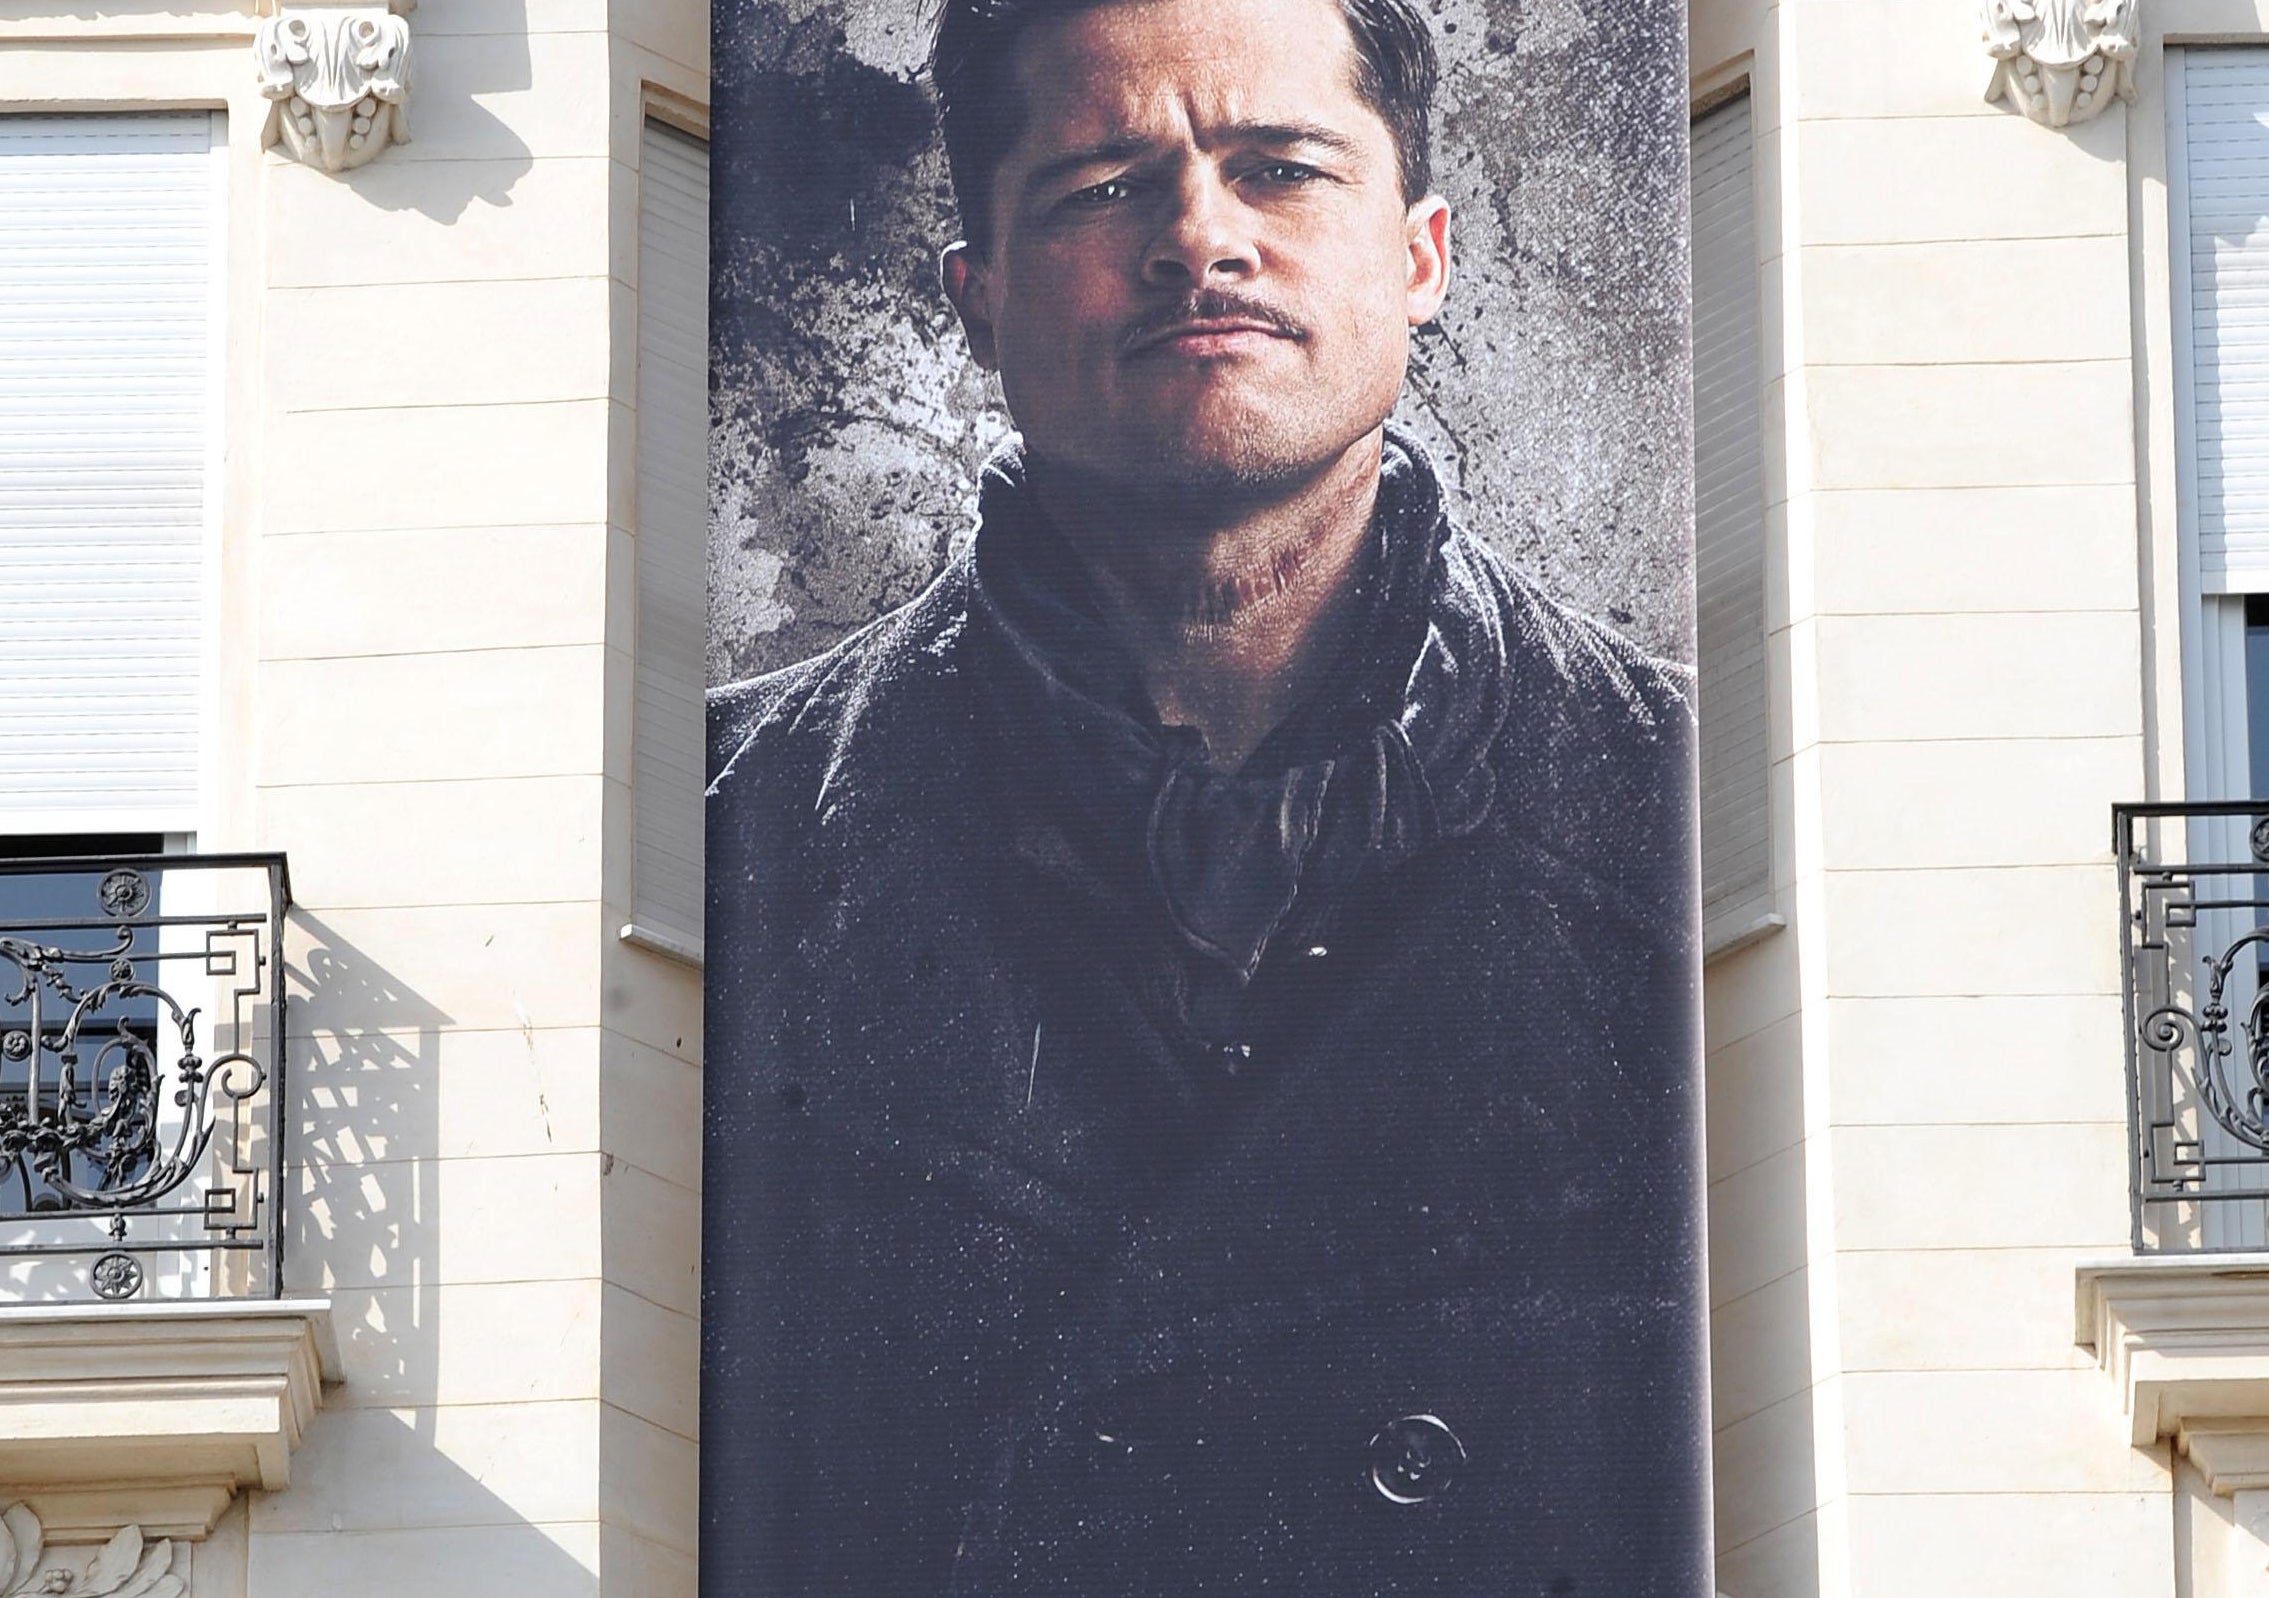 Promotional poster featuring Brad Pitt for Inglourious Basterds film